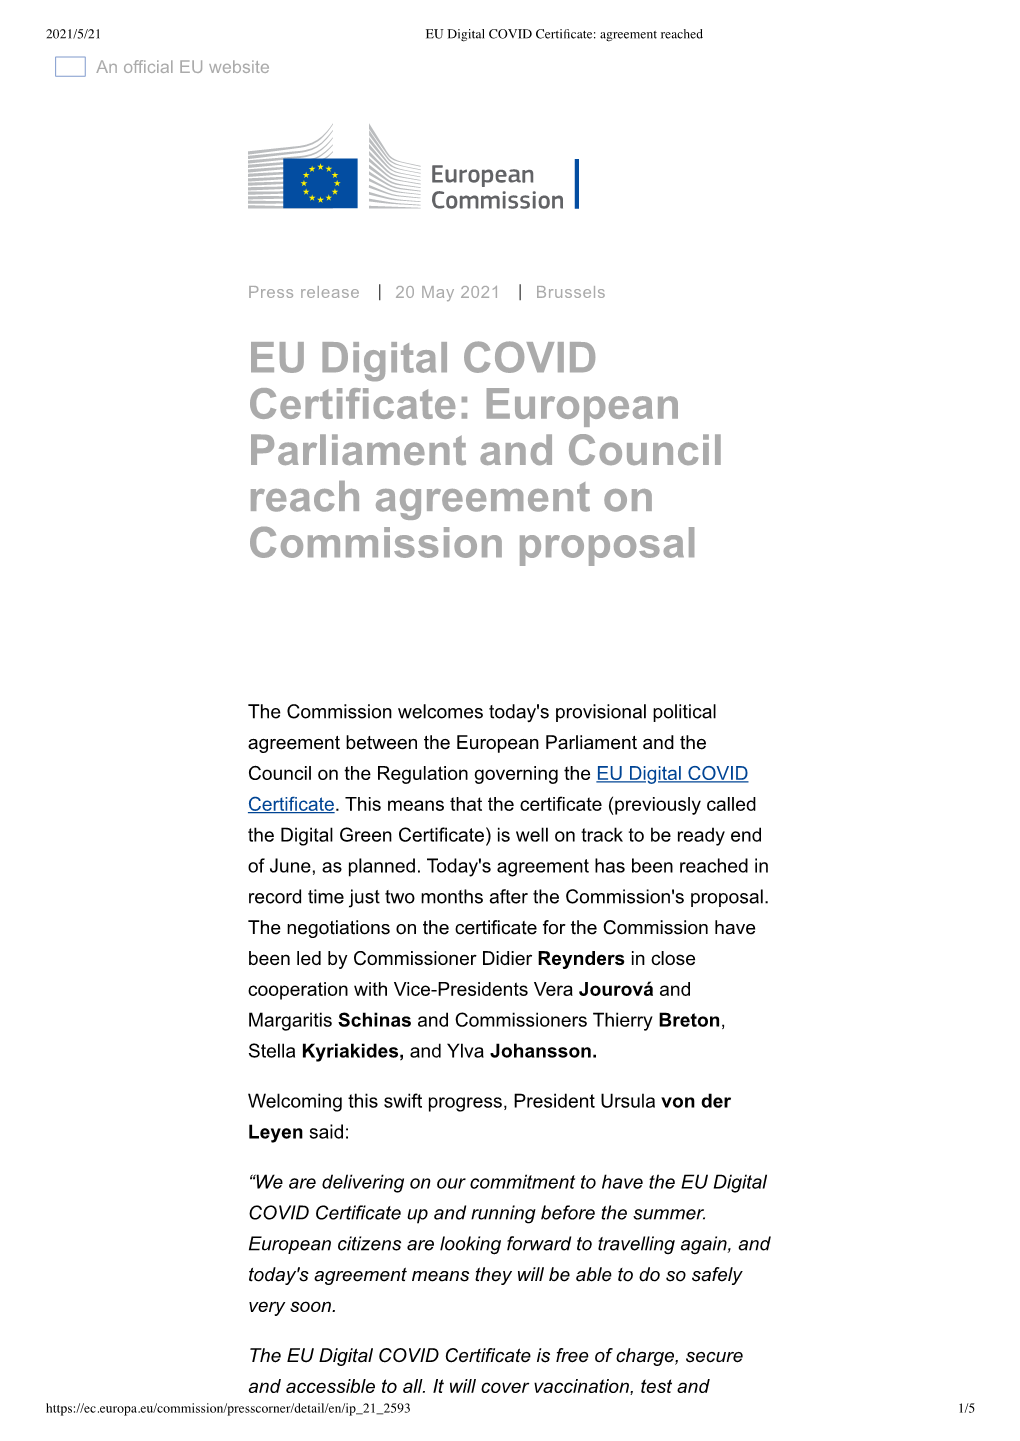 EU Digital COVID Certificate: European Parliament and Council Reach Agreement on Commission Proposal